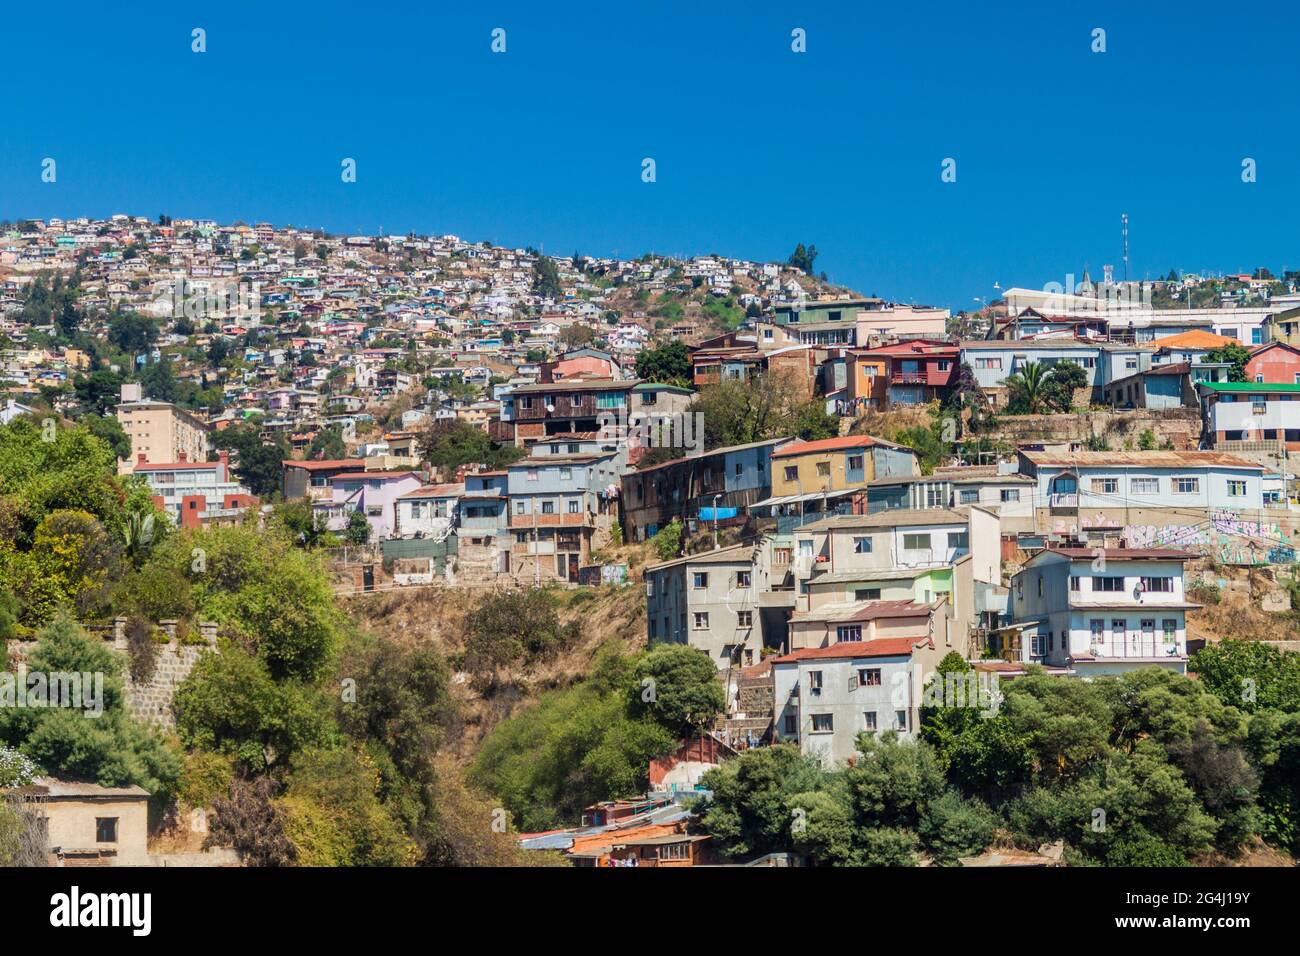 Colorful houses on hills in Valparaiso, Chile Stock Photo